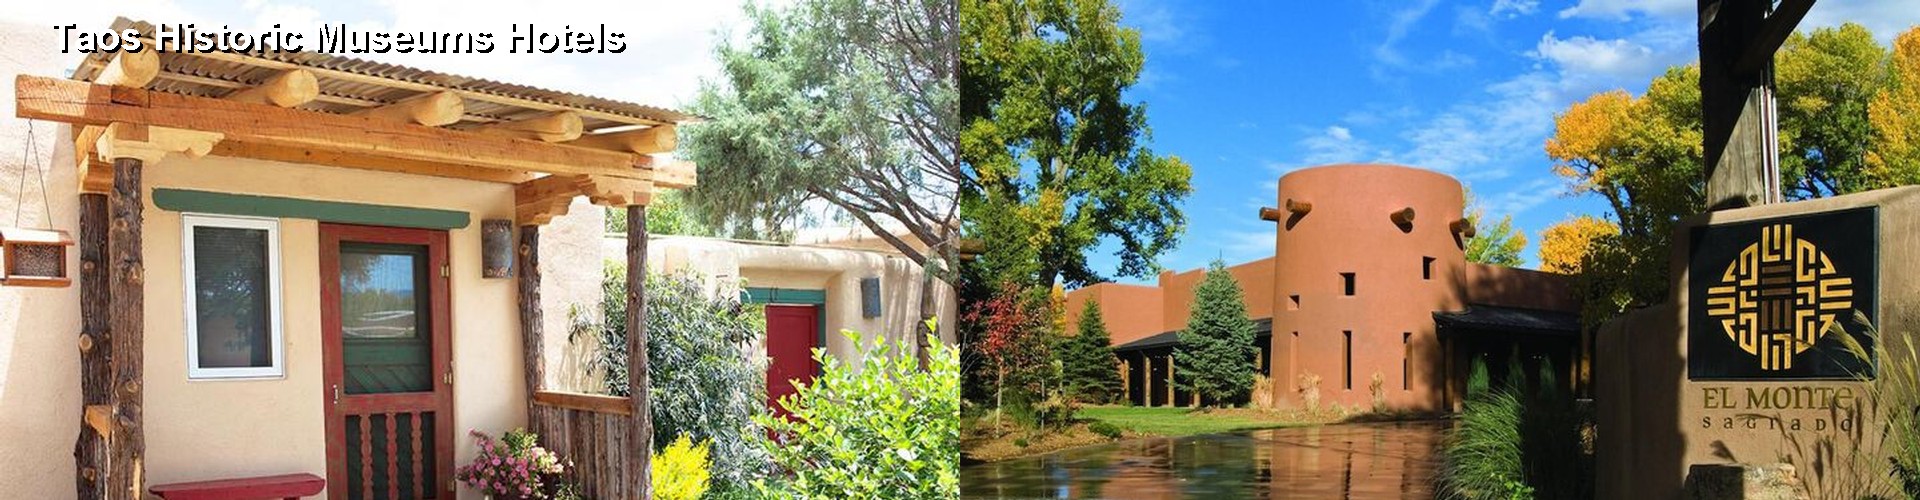 5 Best Hotels near Taos Historic Museums